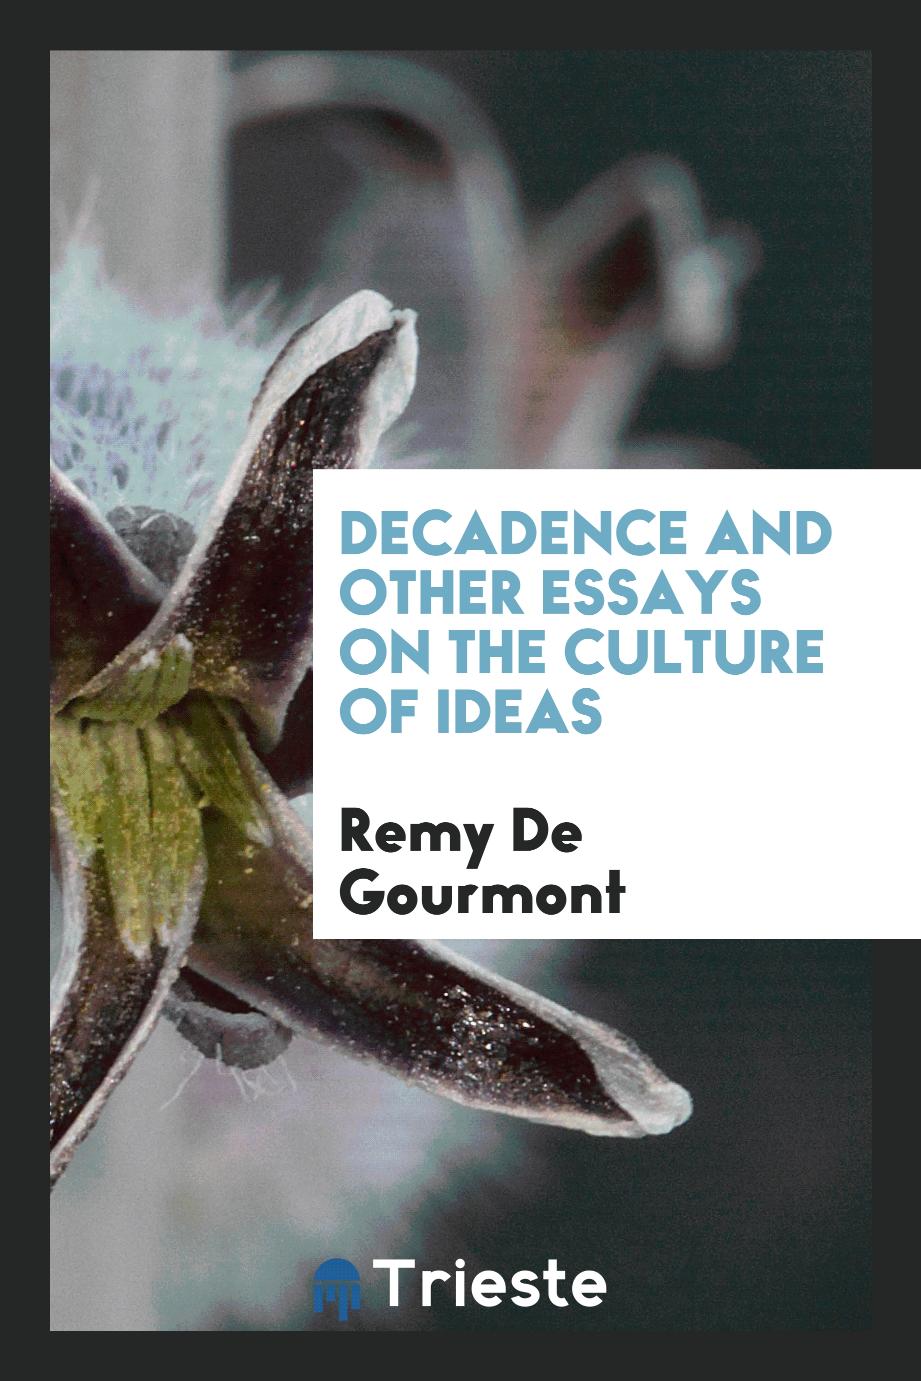 Remy De Gourmont - Decadence and other essays on the culture of ideas